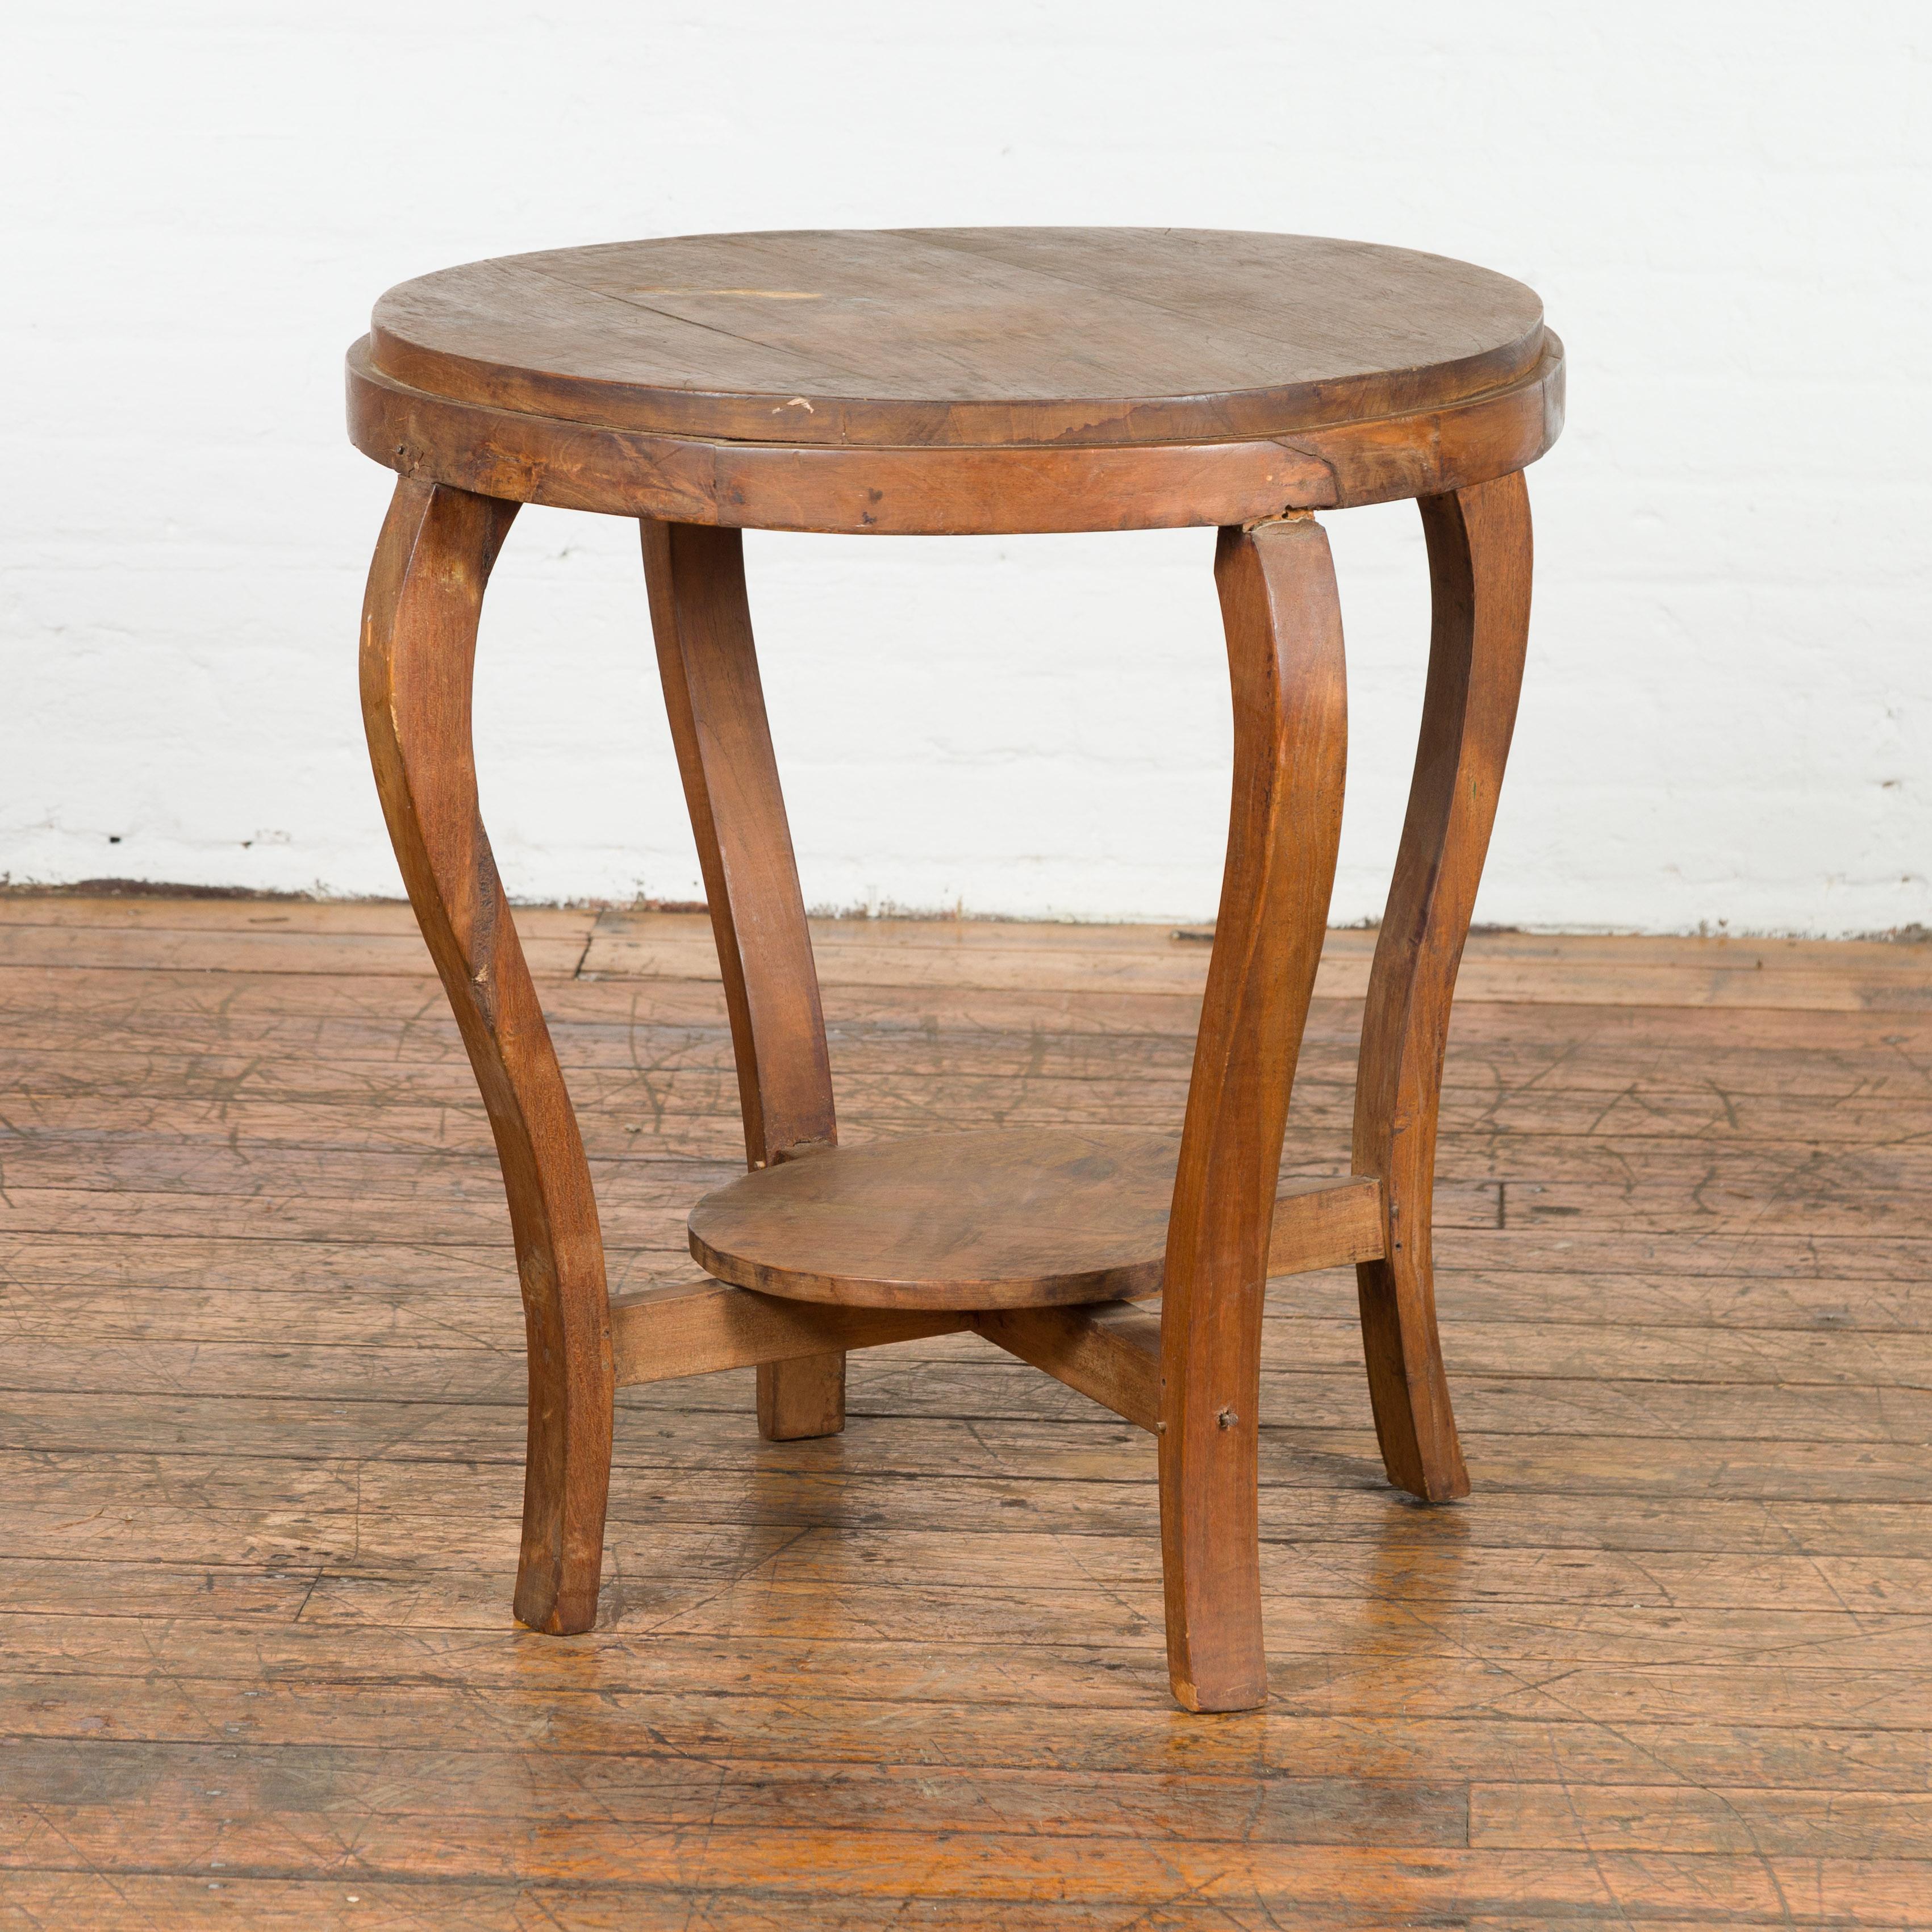 1900s Antique End Table with Curved Legs & Lower Shelf Embodying early 20th-century Indonesian craftsmanship. This  side table carries an air of whimsical elegance. The table effortlessly melds functionality with a simple aesthetic, ensuring it